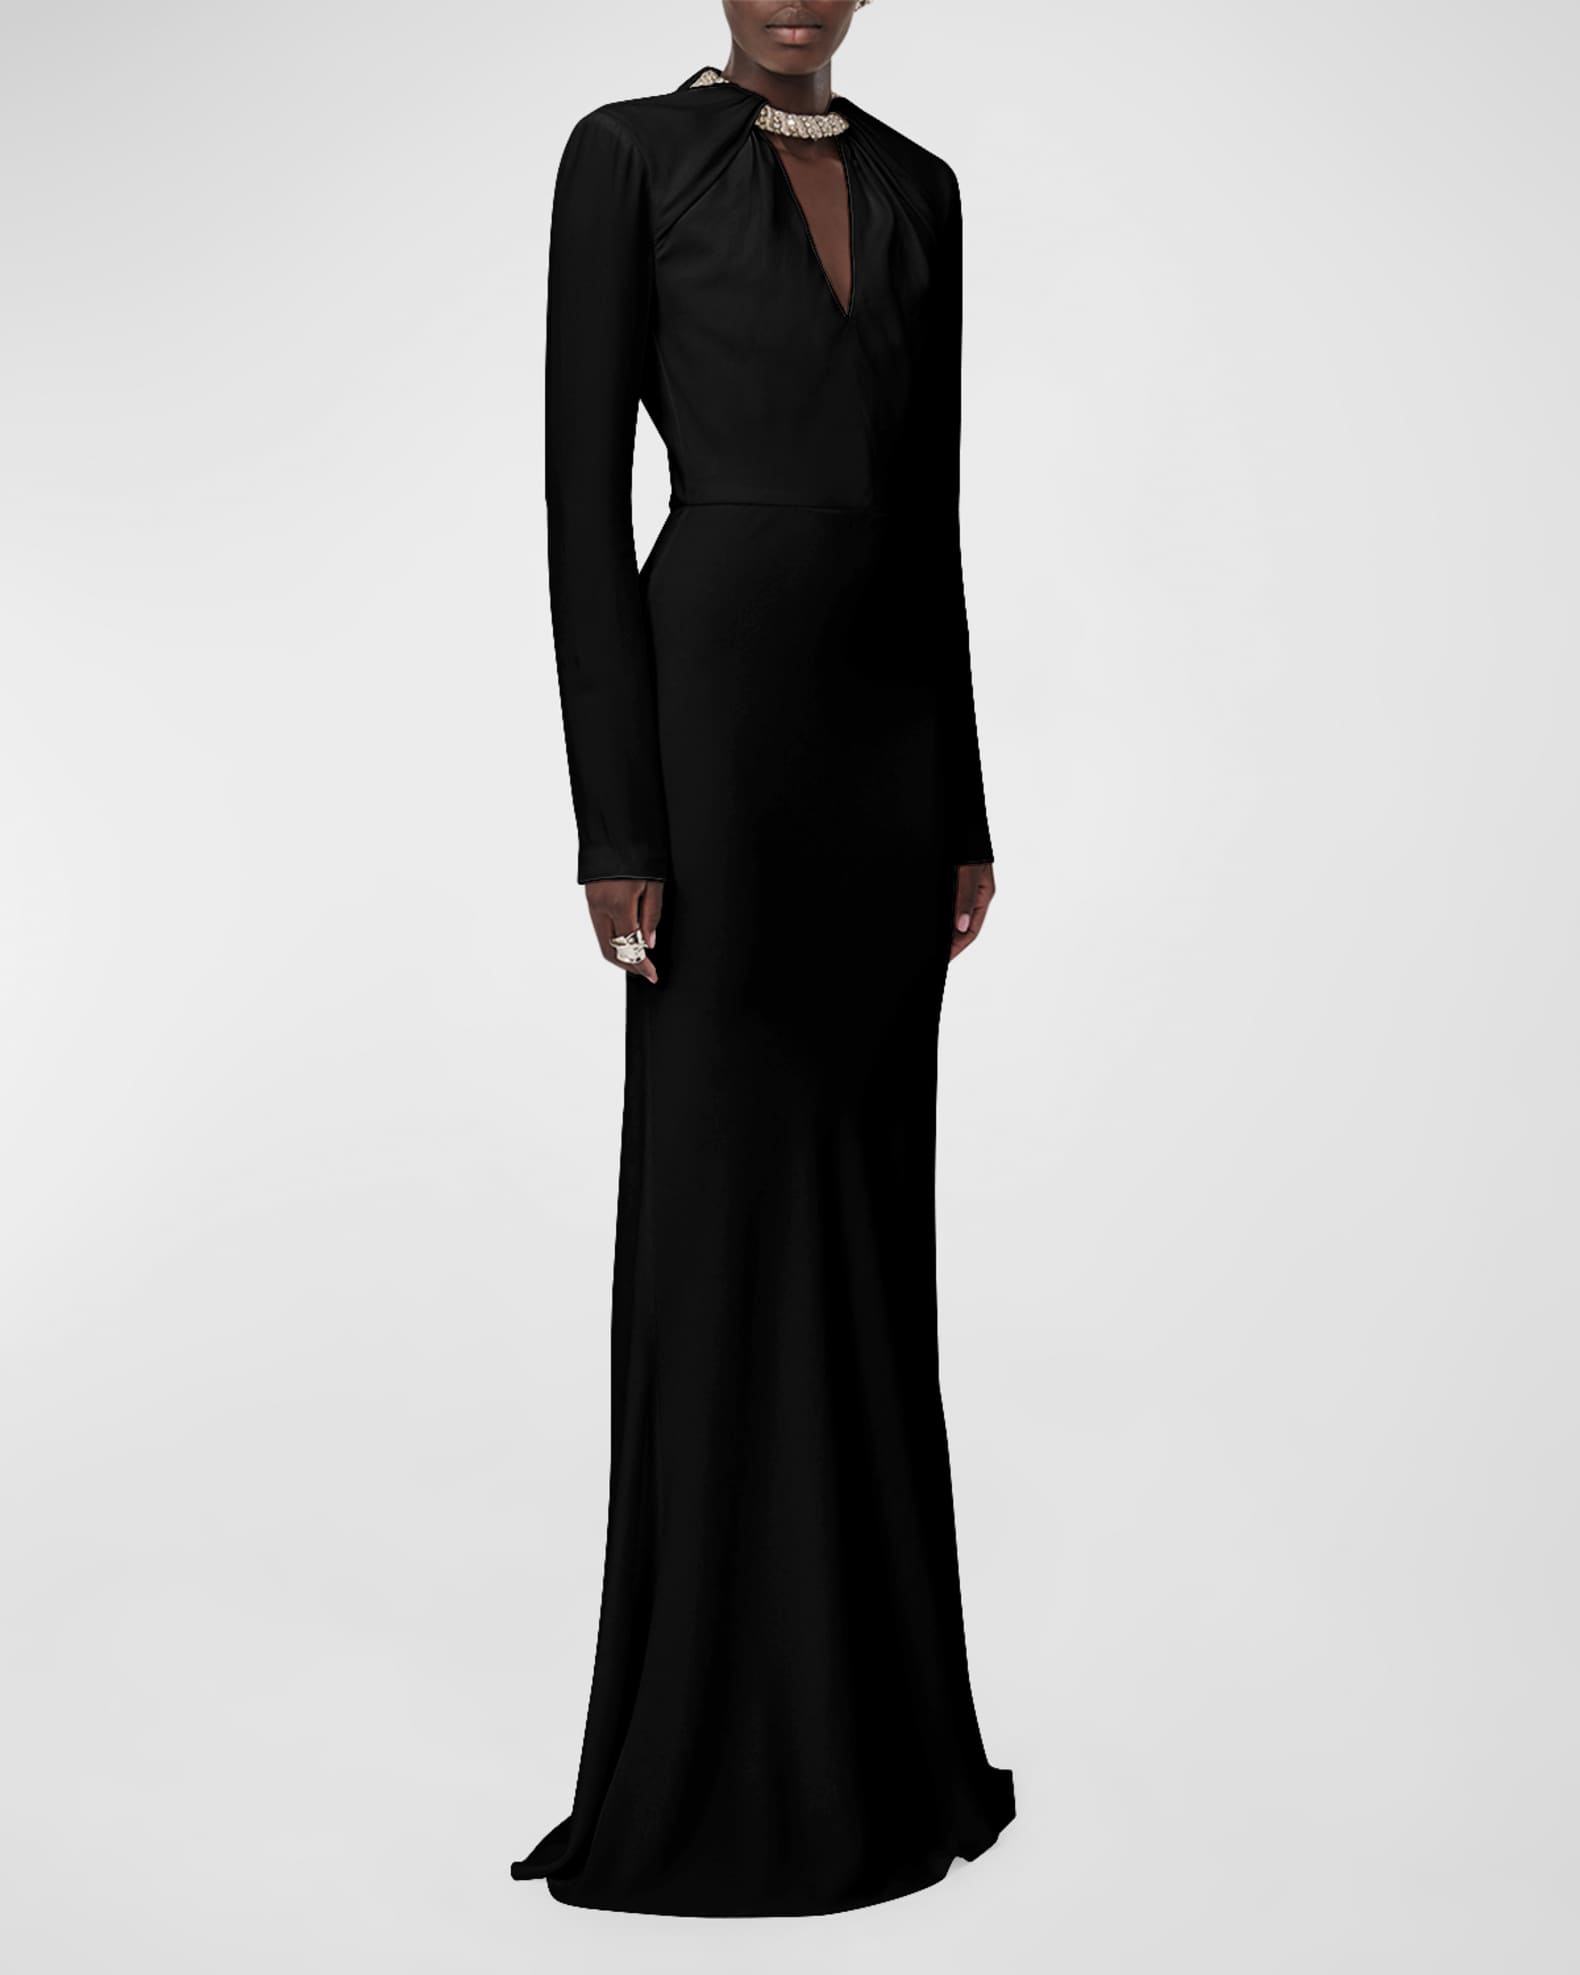 Alexander McQueen Certified Leaf Crepe Gown with Crystal Neckline ...